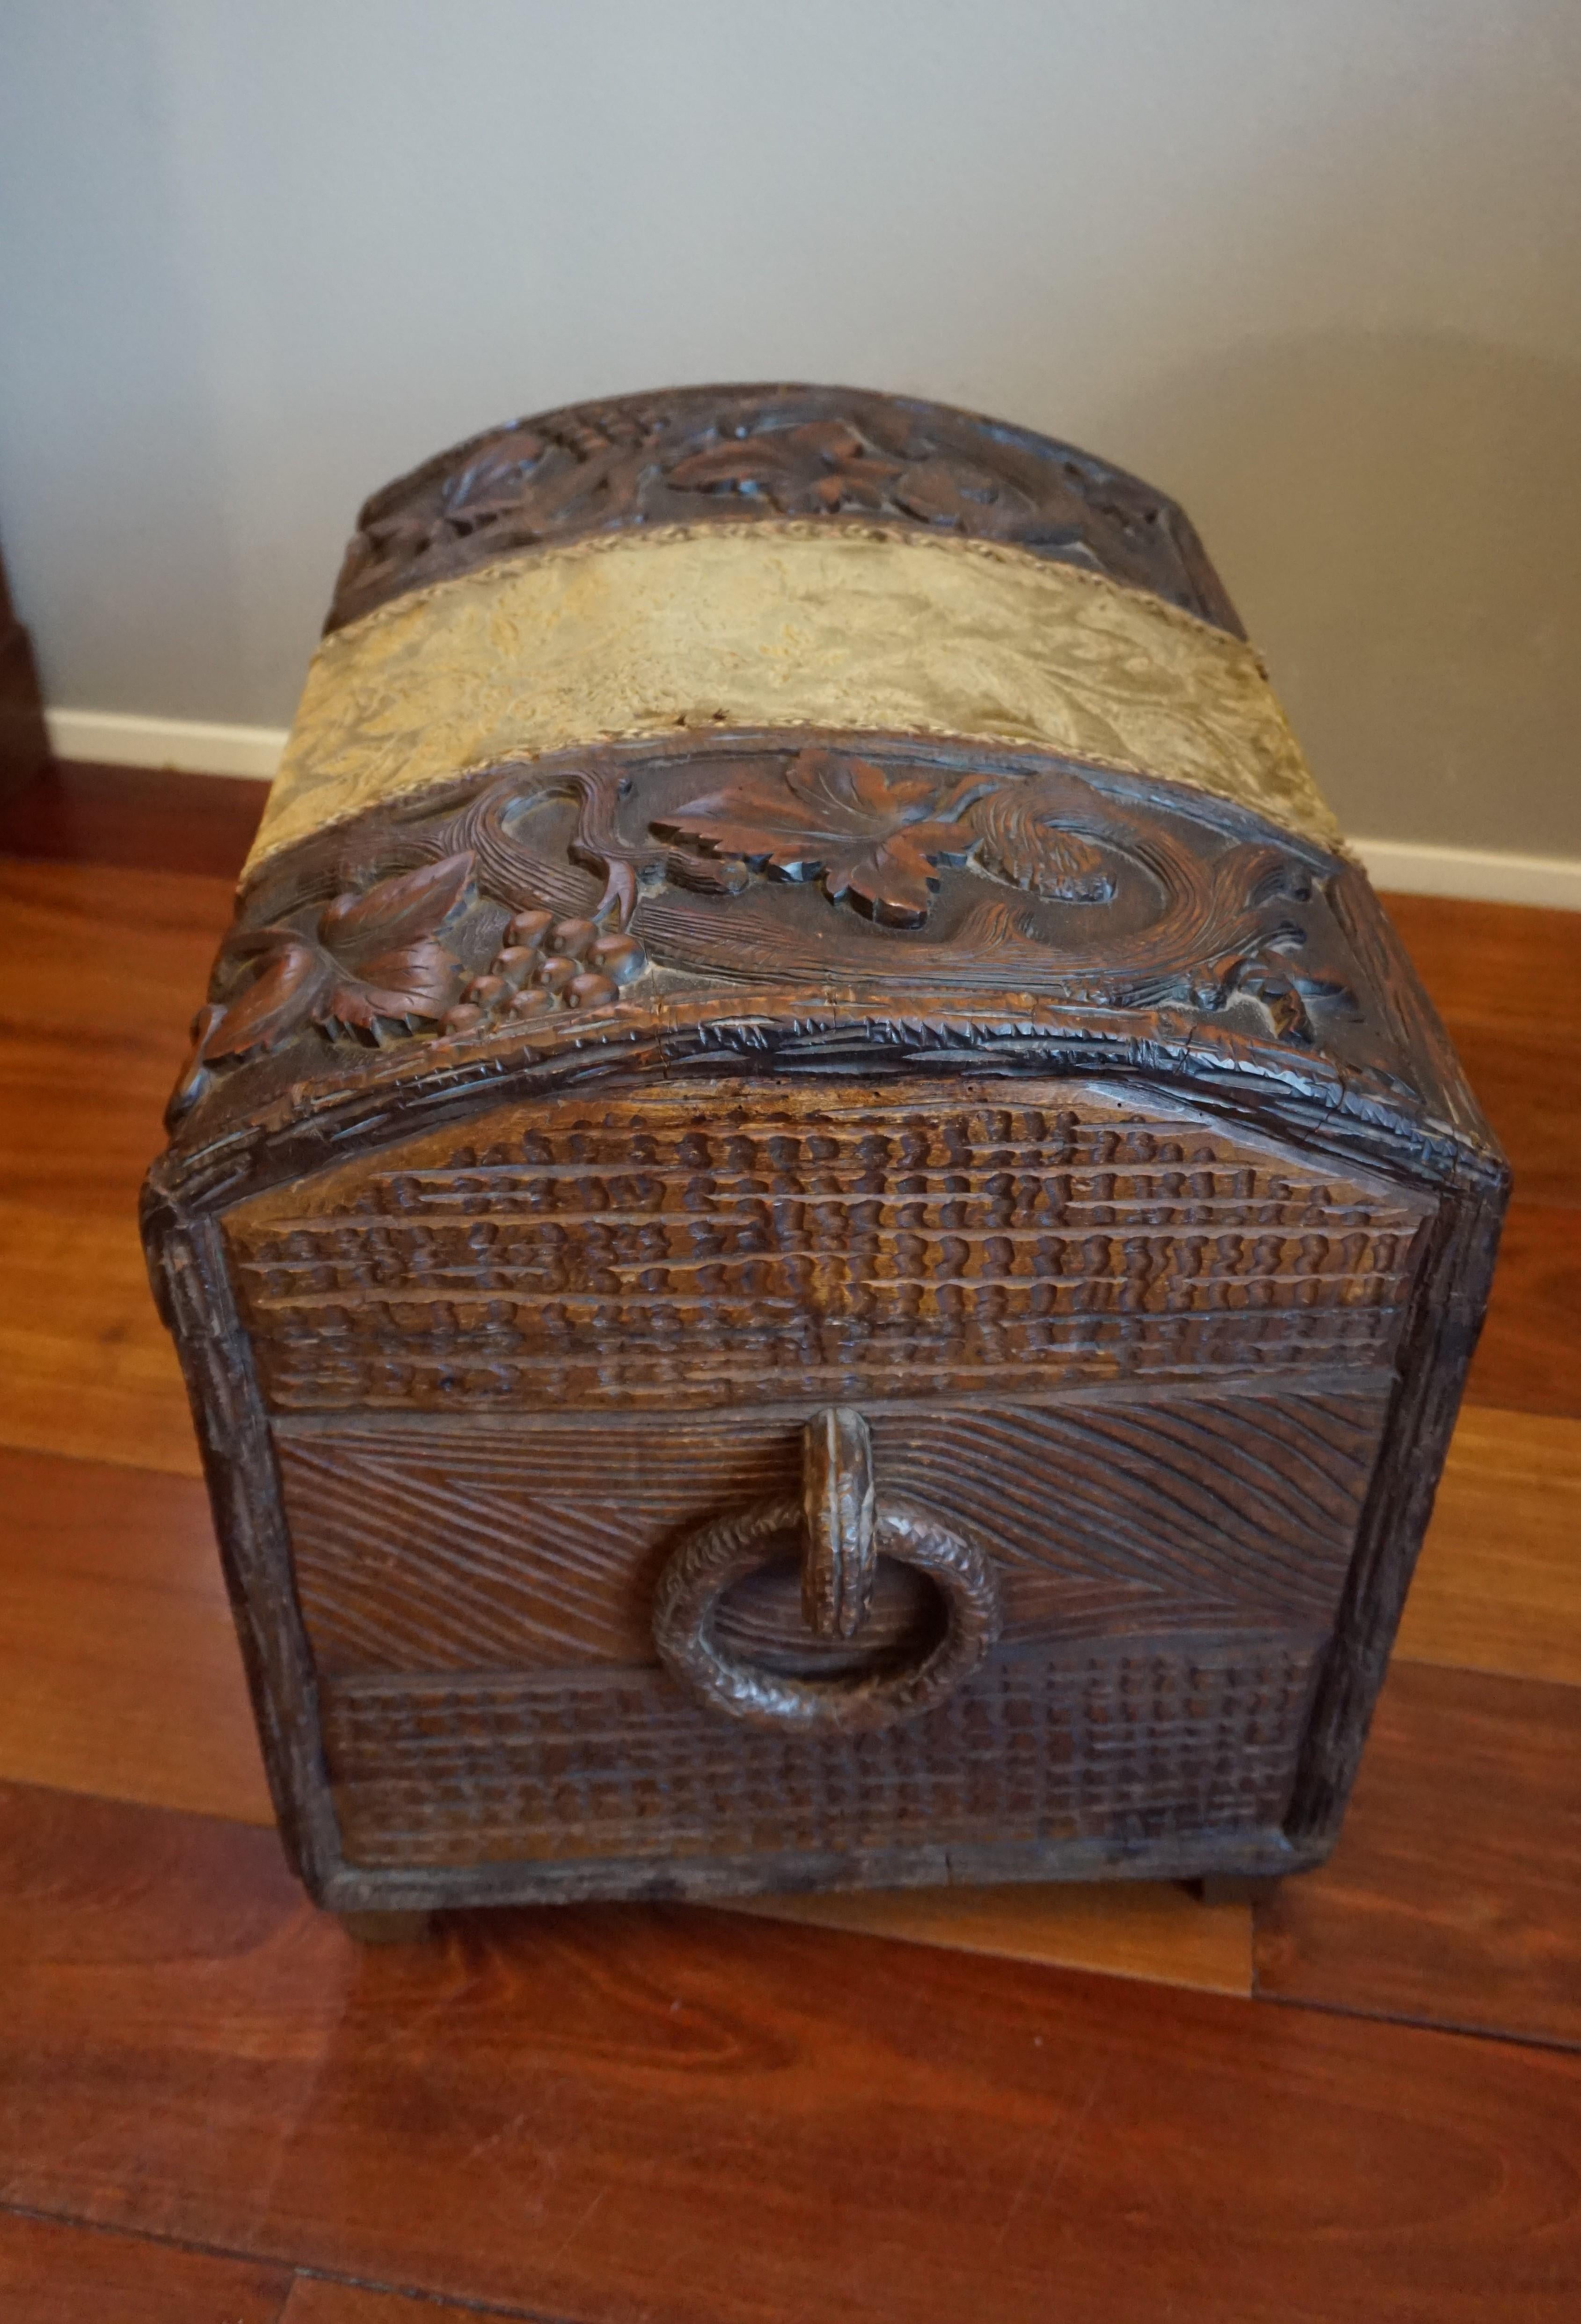 Stunning late 19th century trunk with wine theme carvings.

If you are looking for rare, stylish and good quality antiques to decorate your home or lodge, but you do want them to have a purpose as well, then this all handcrafted trunk from the late